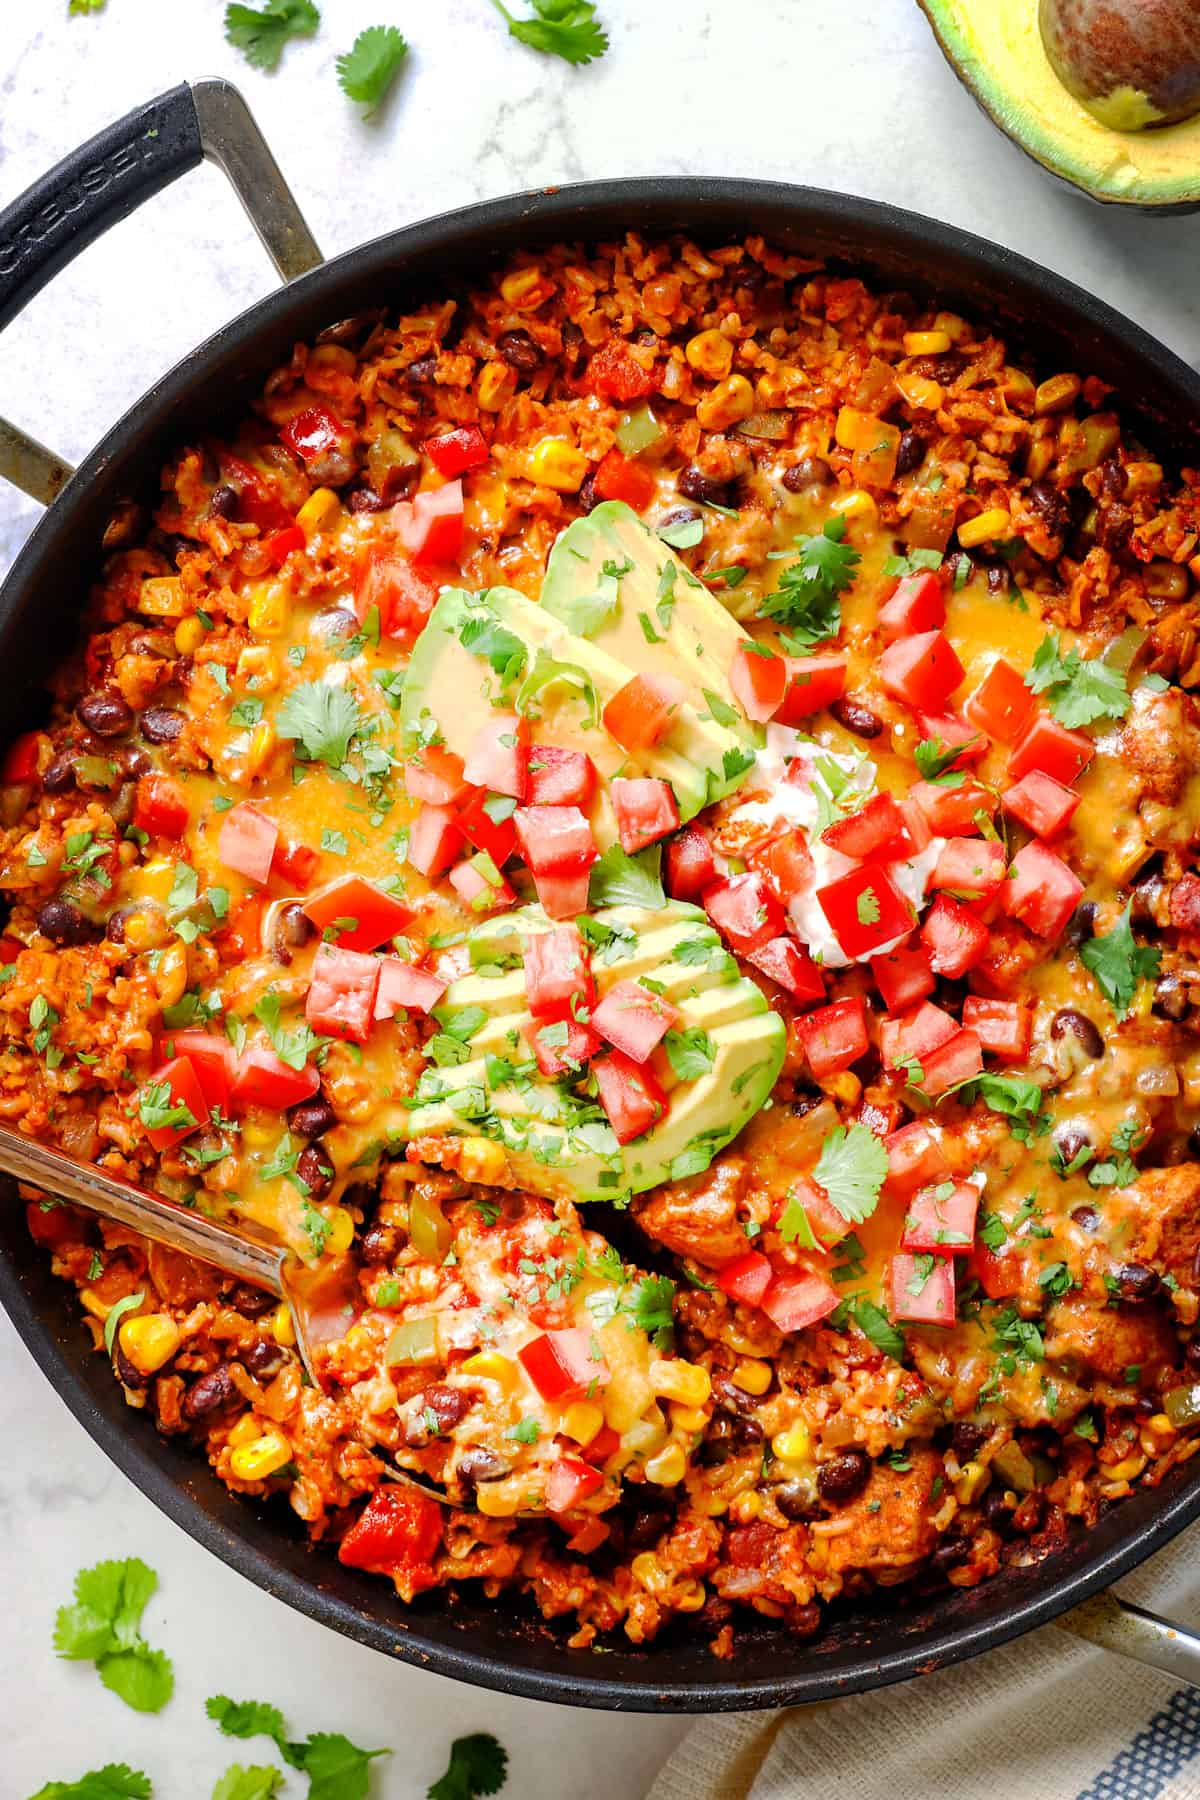 showing how to make chicken fiesta recipe by topping the skillet with sour cream, avocados and pico de gallo